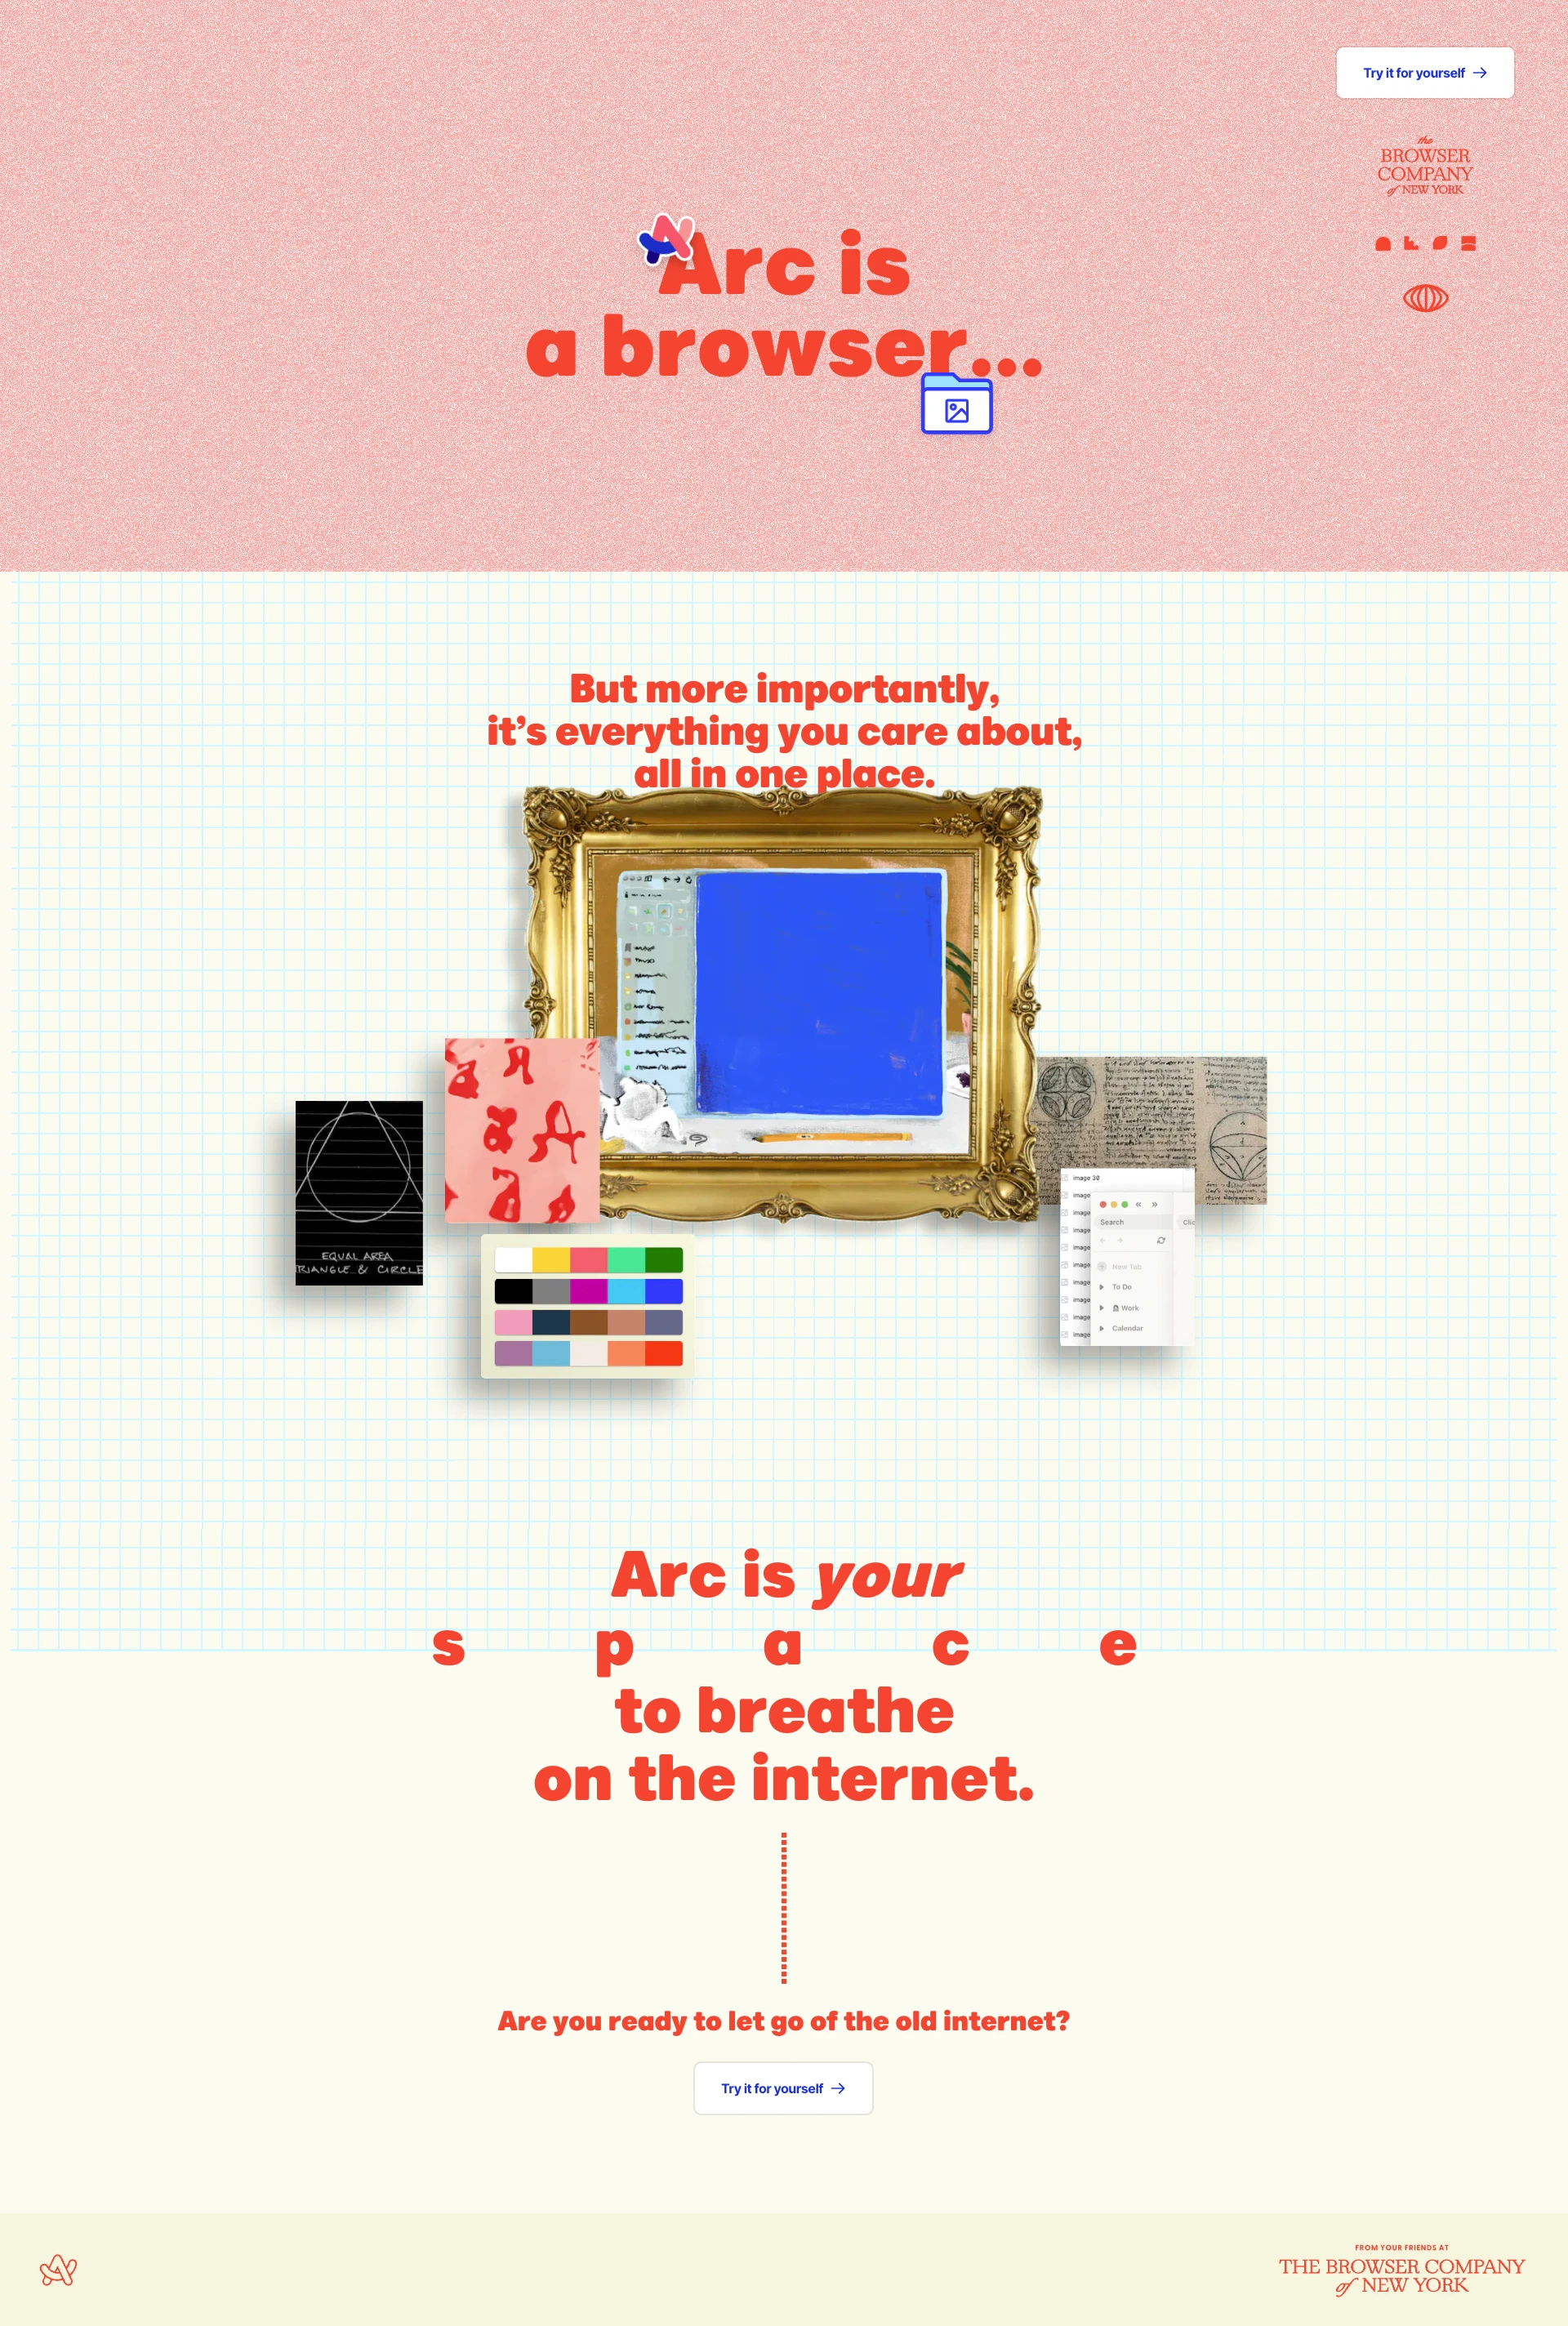 Arc Landing Page Example: Experience a calmer, more personal internet in this browser designed for you. Let go of the clicks, the clutter, the distractions.